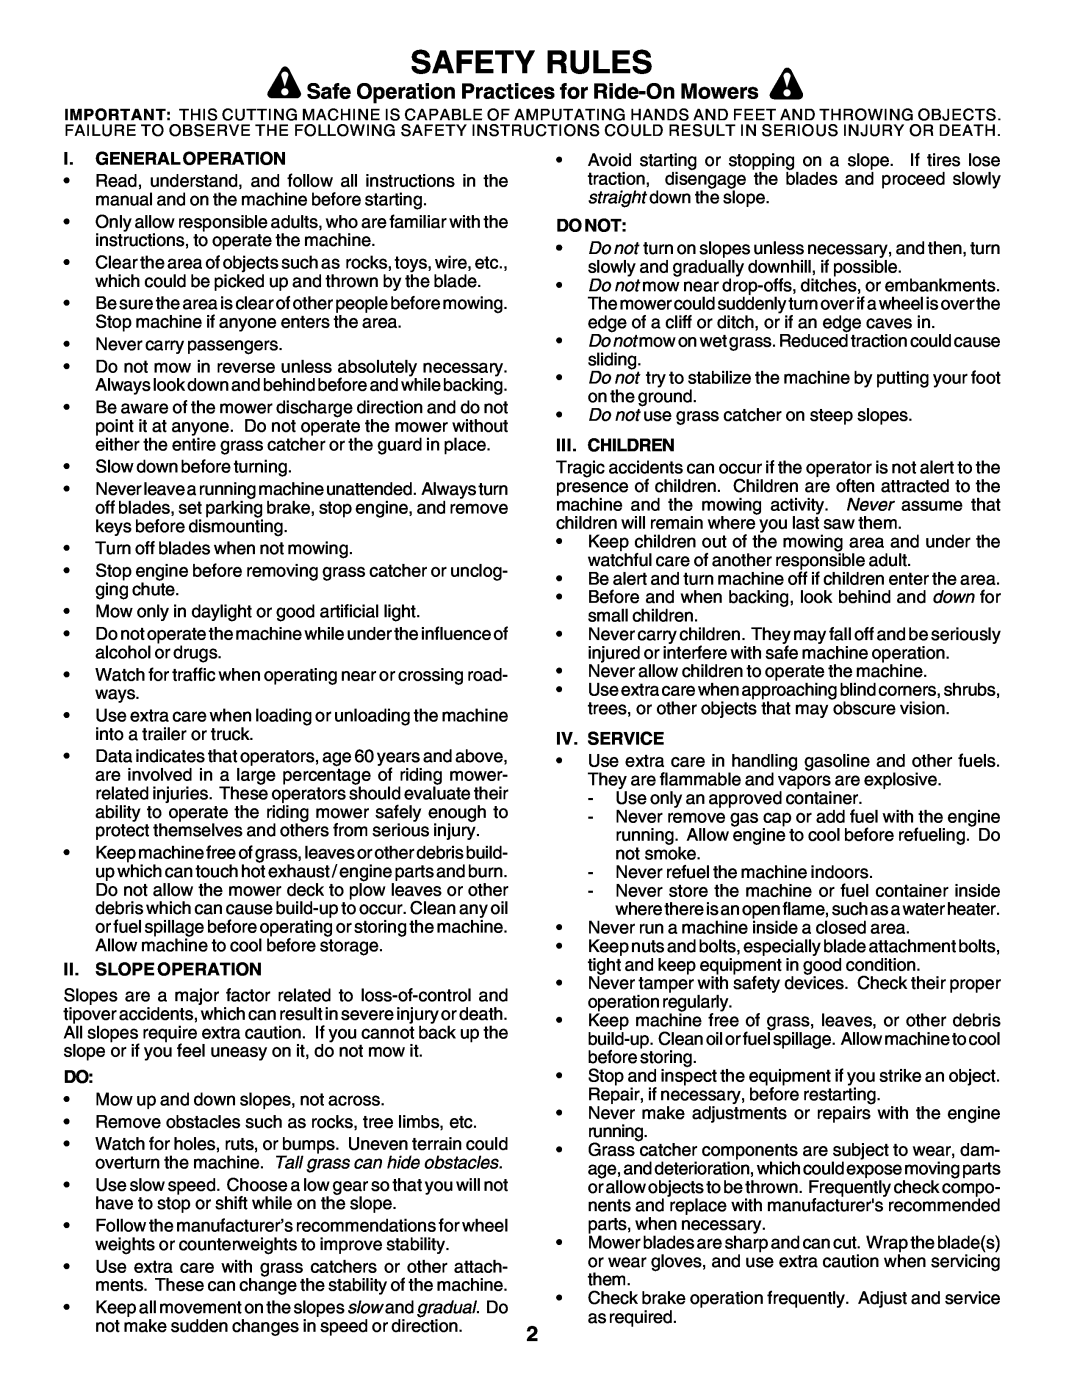 Poulan 180200 owner manual Safety Rules, Safe Operation Practices for Ride-On Mowers 